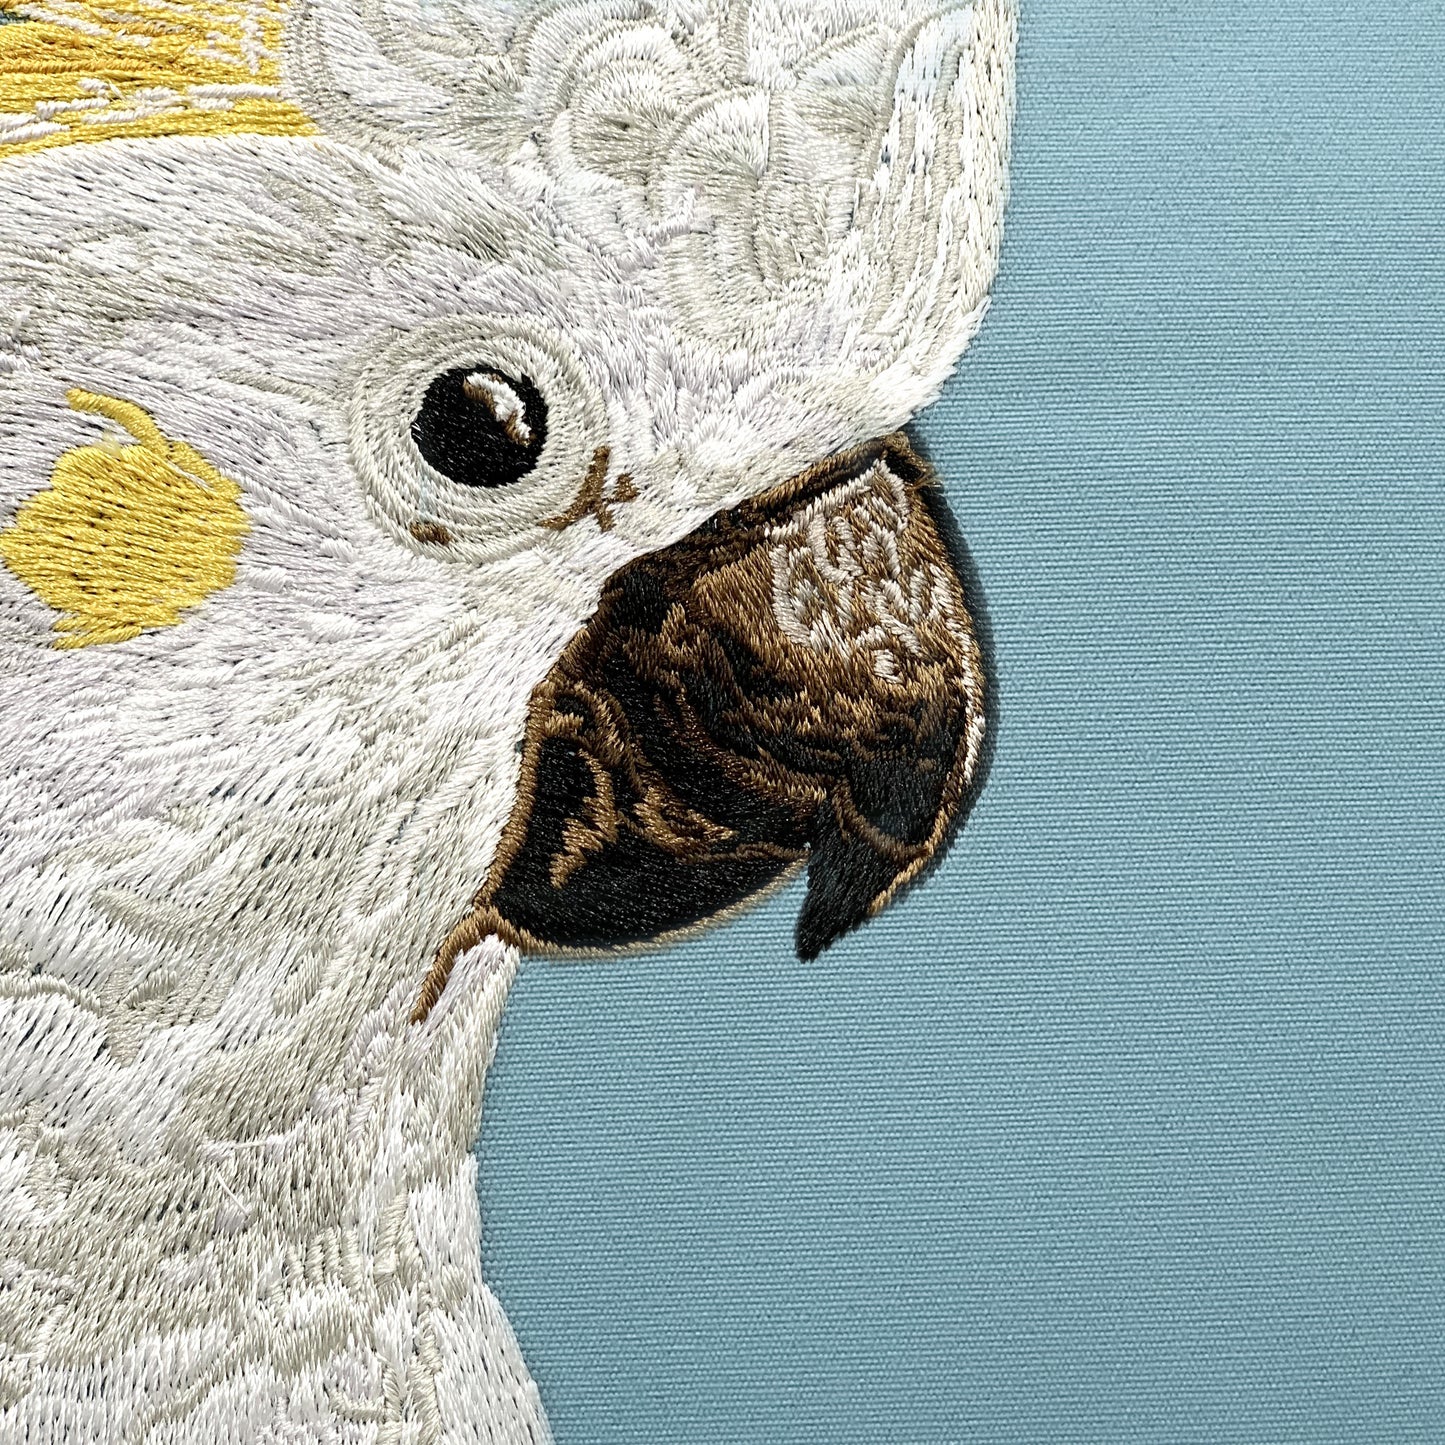 Detail shot of the Cockatoo and Leaves Indoor Outdoor Pillow embroidery.